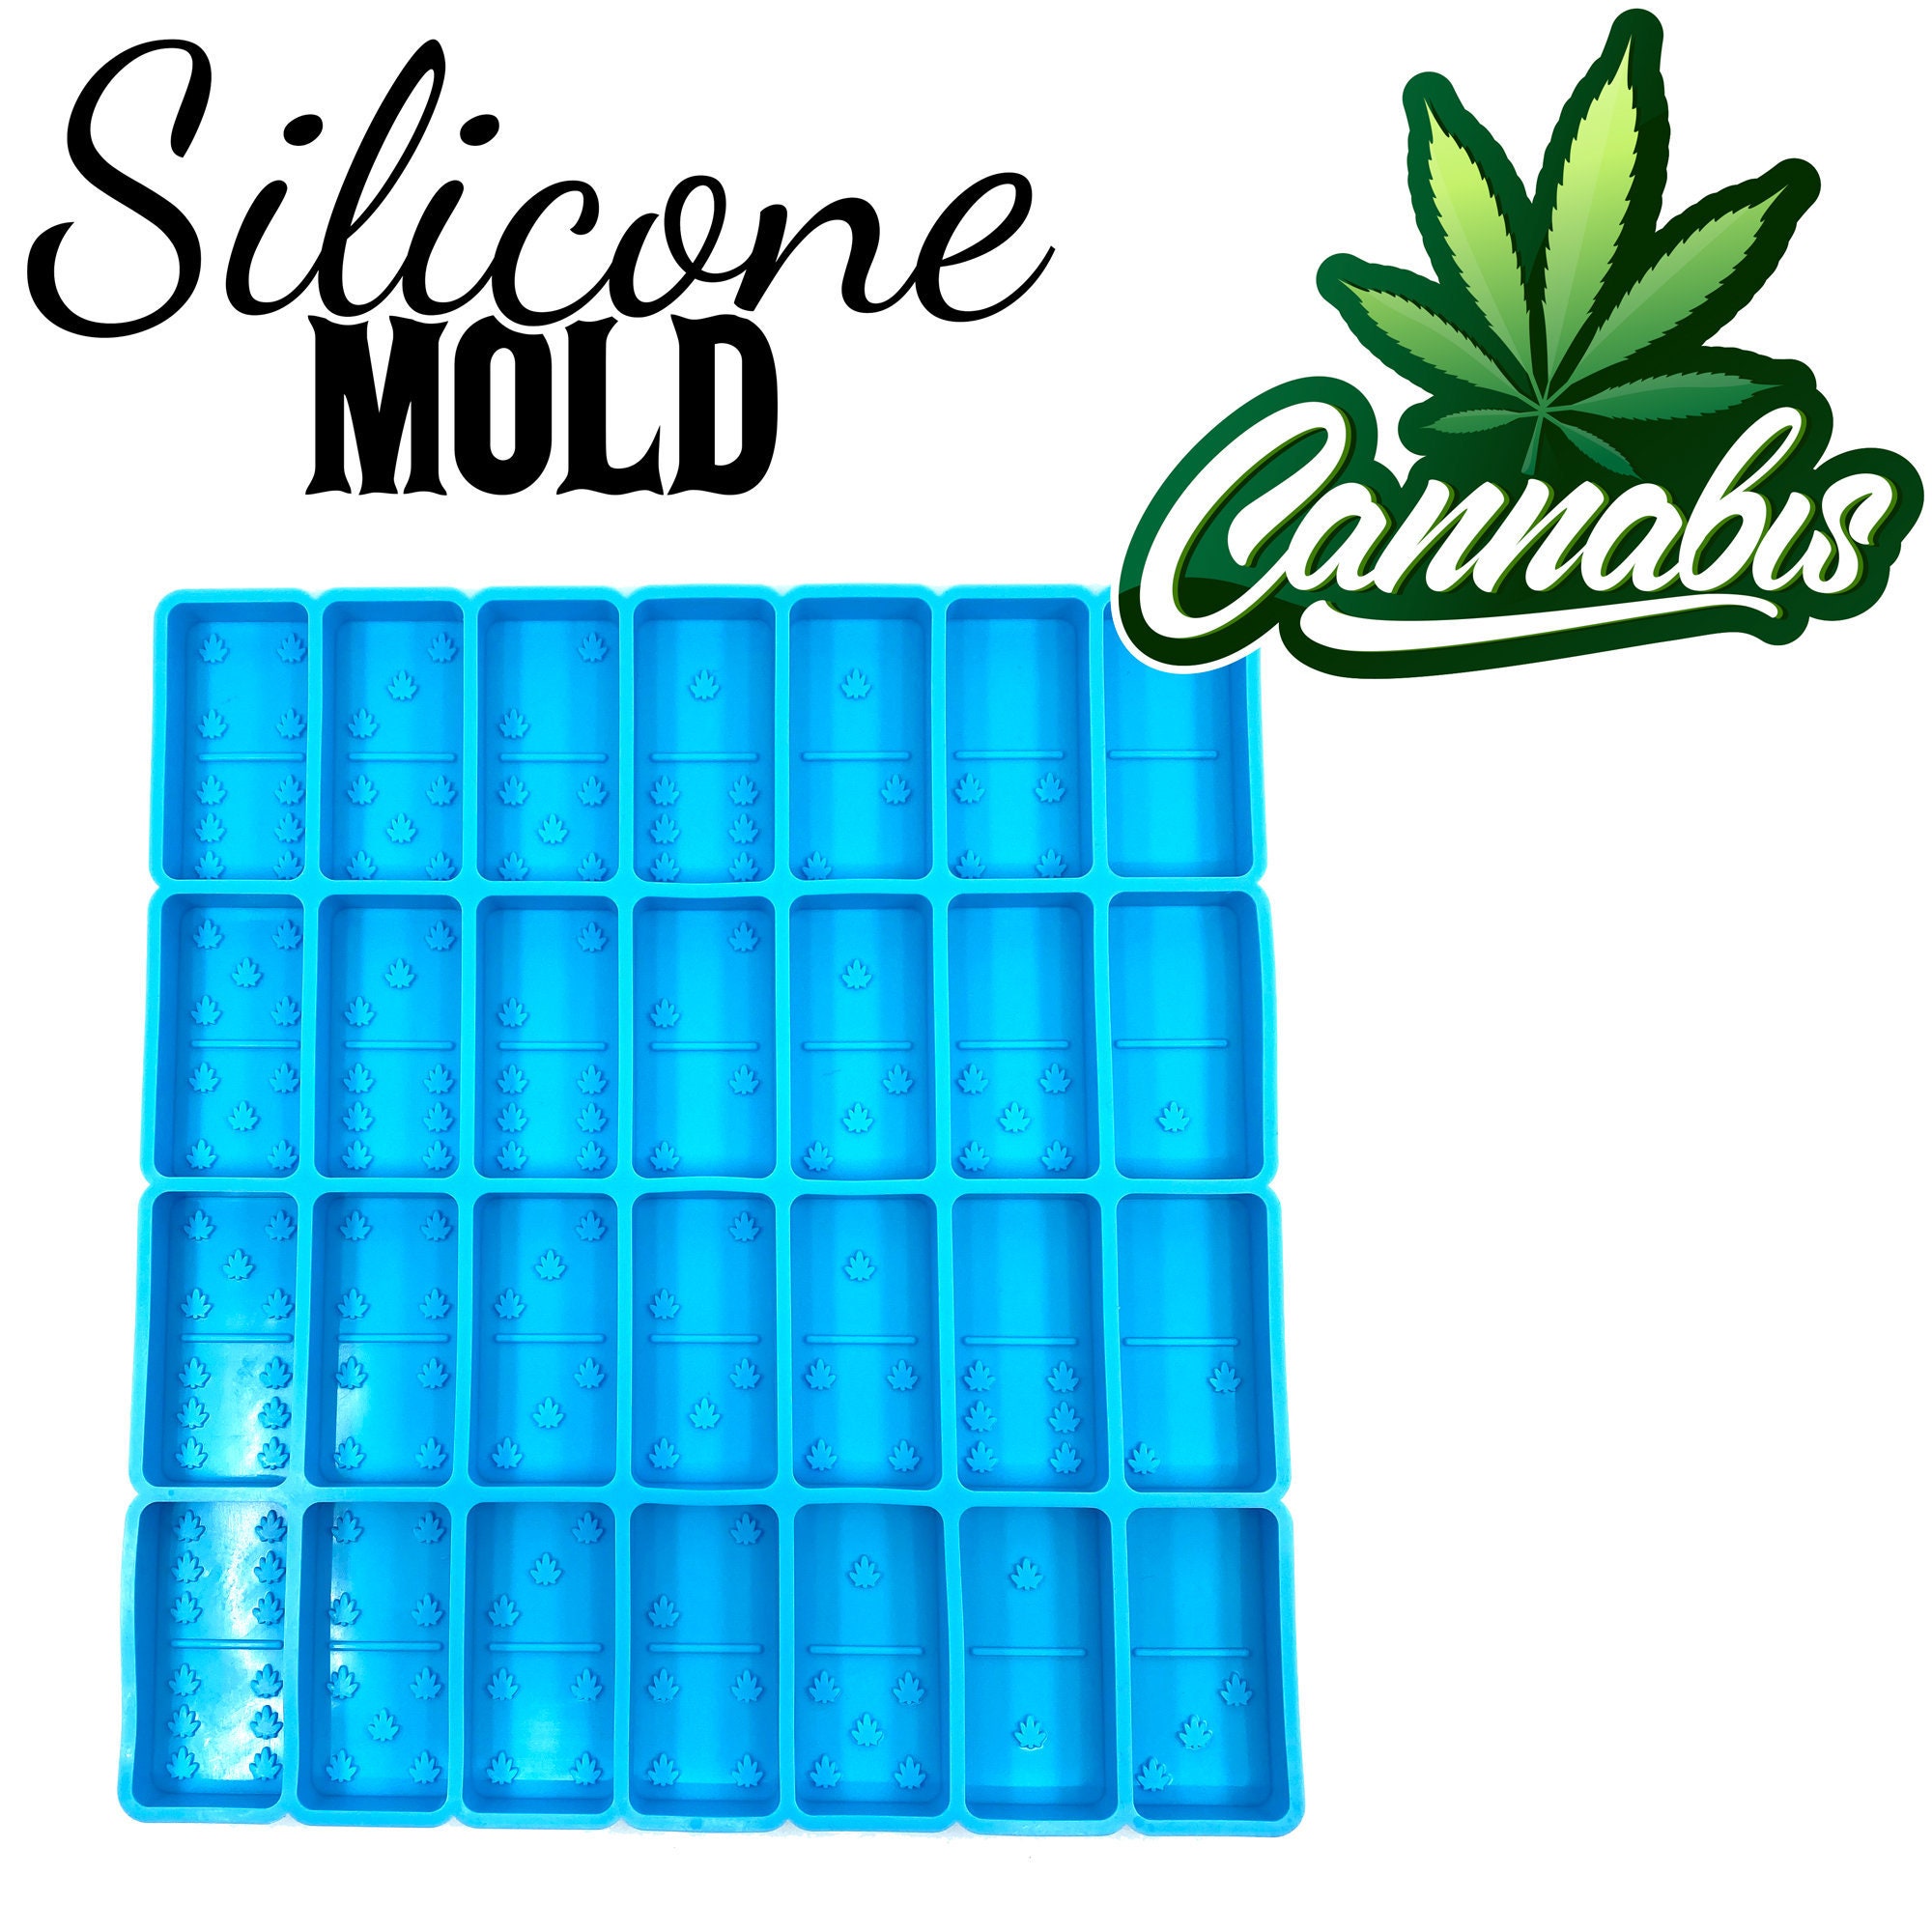 Dominoes Mold Resin, Domino Set Silicone Molds, Games Making, Home